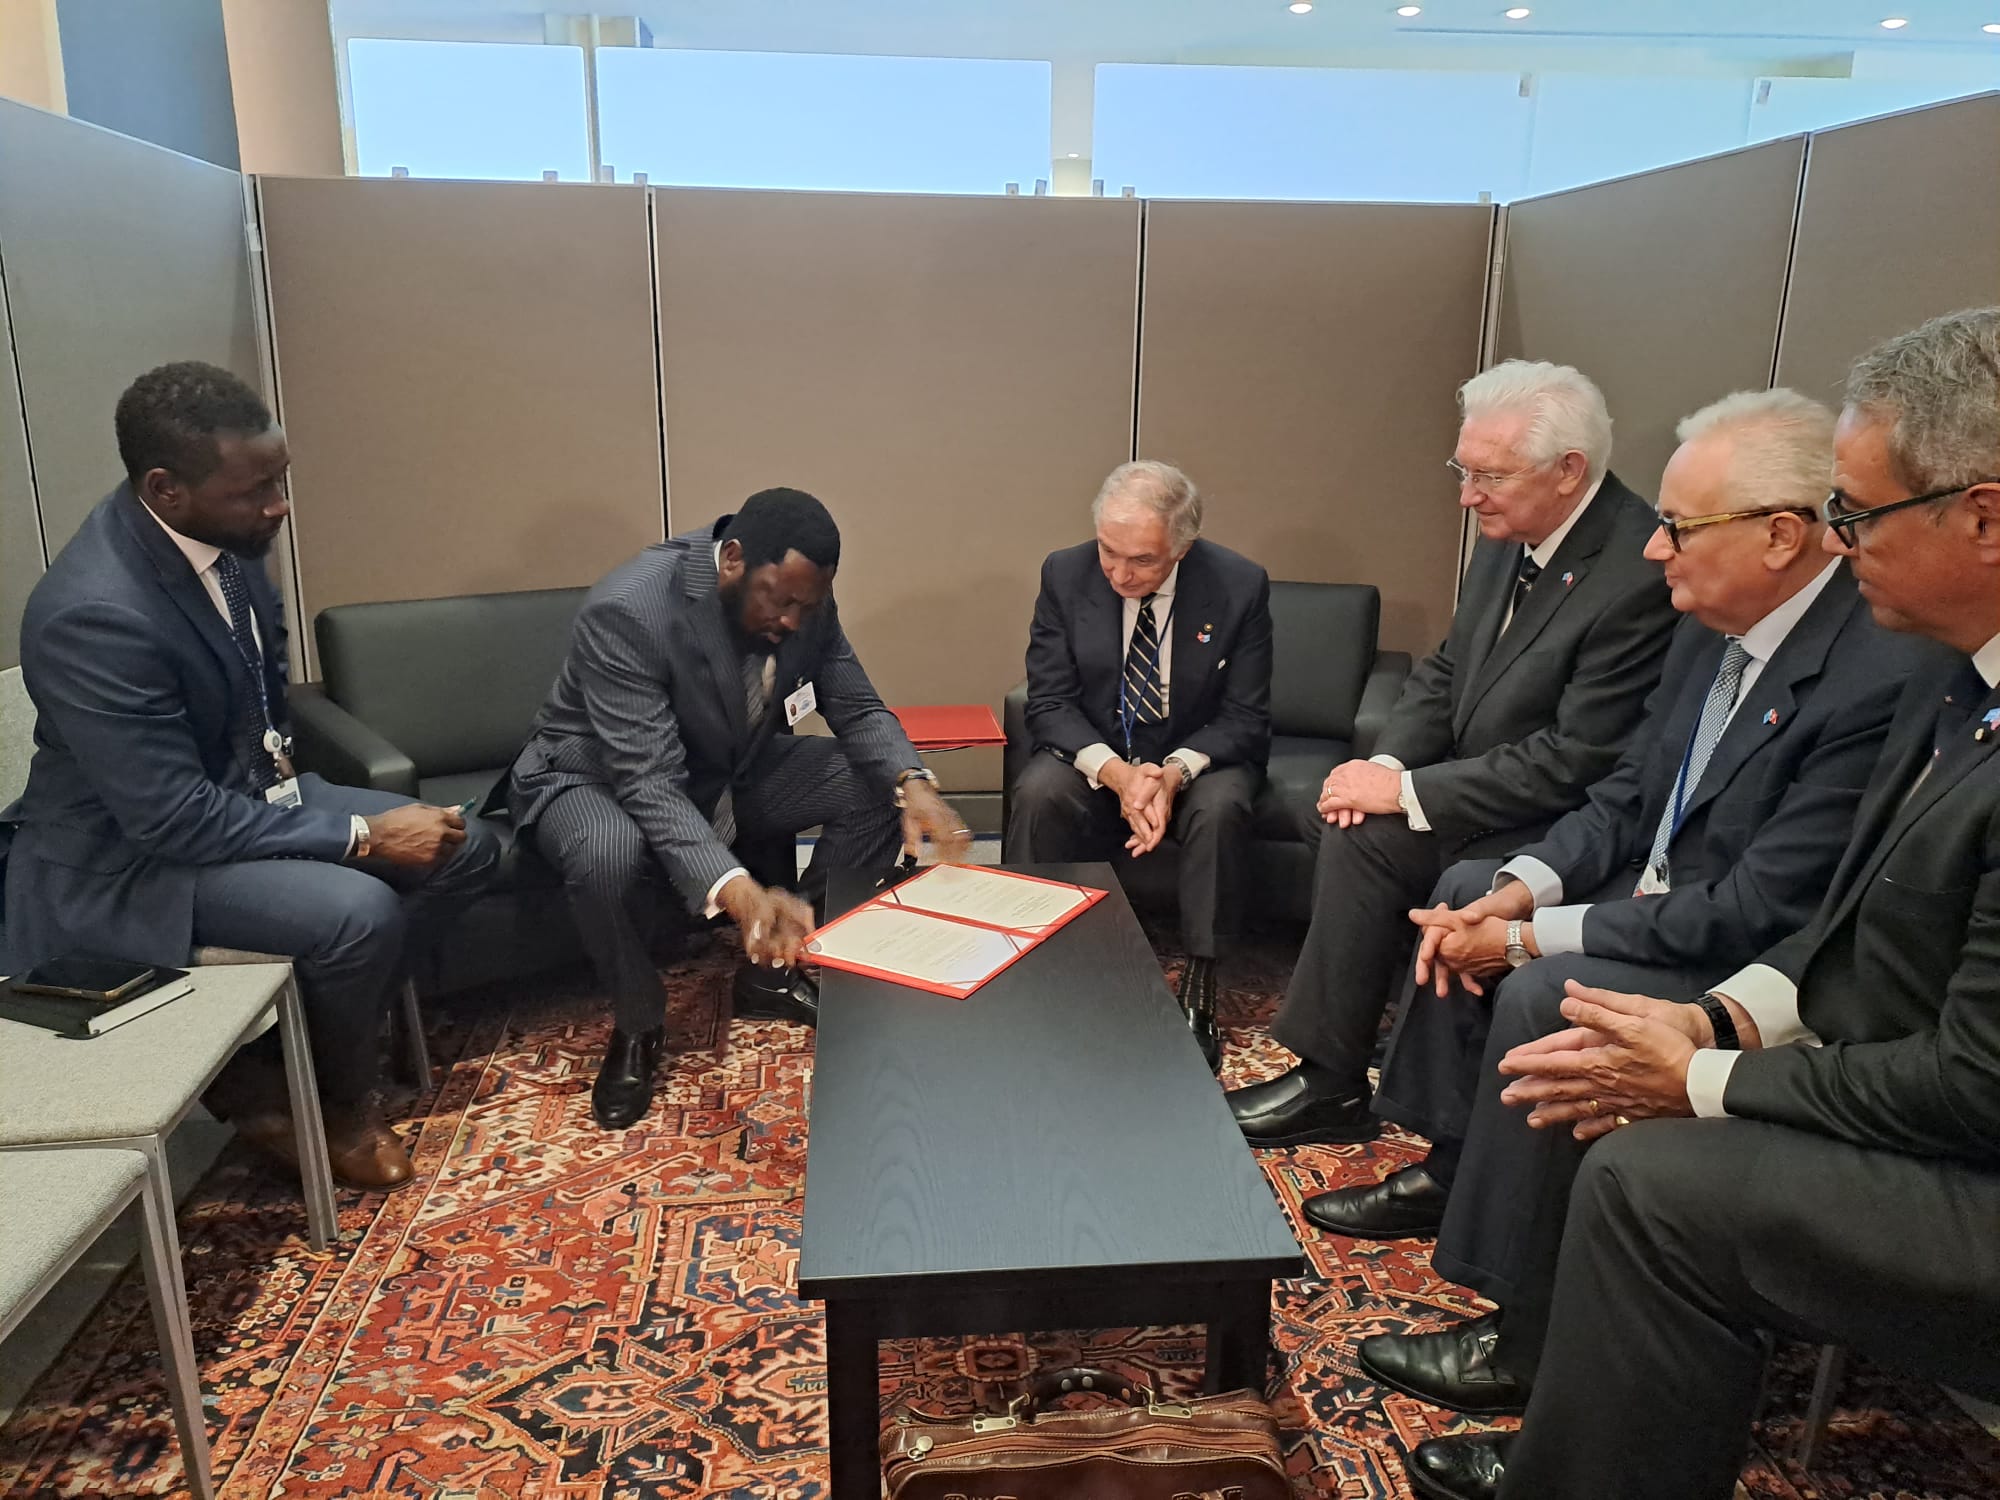 The Order of Malta announces the opening of diplomatic relations with the Republic of The Gambia